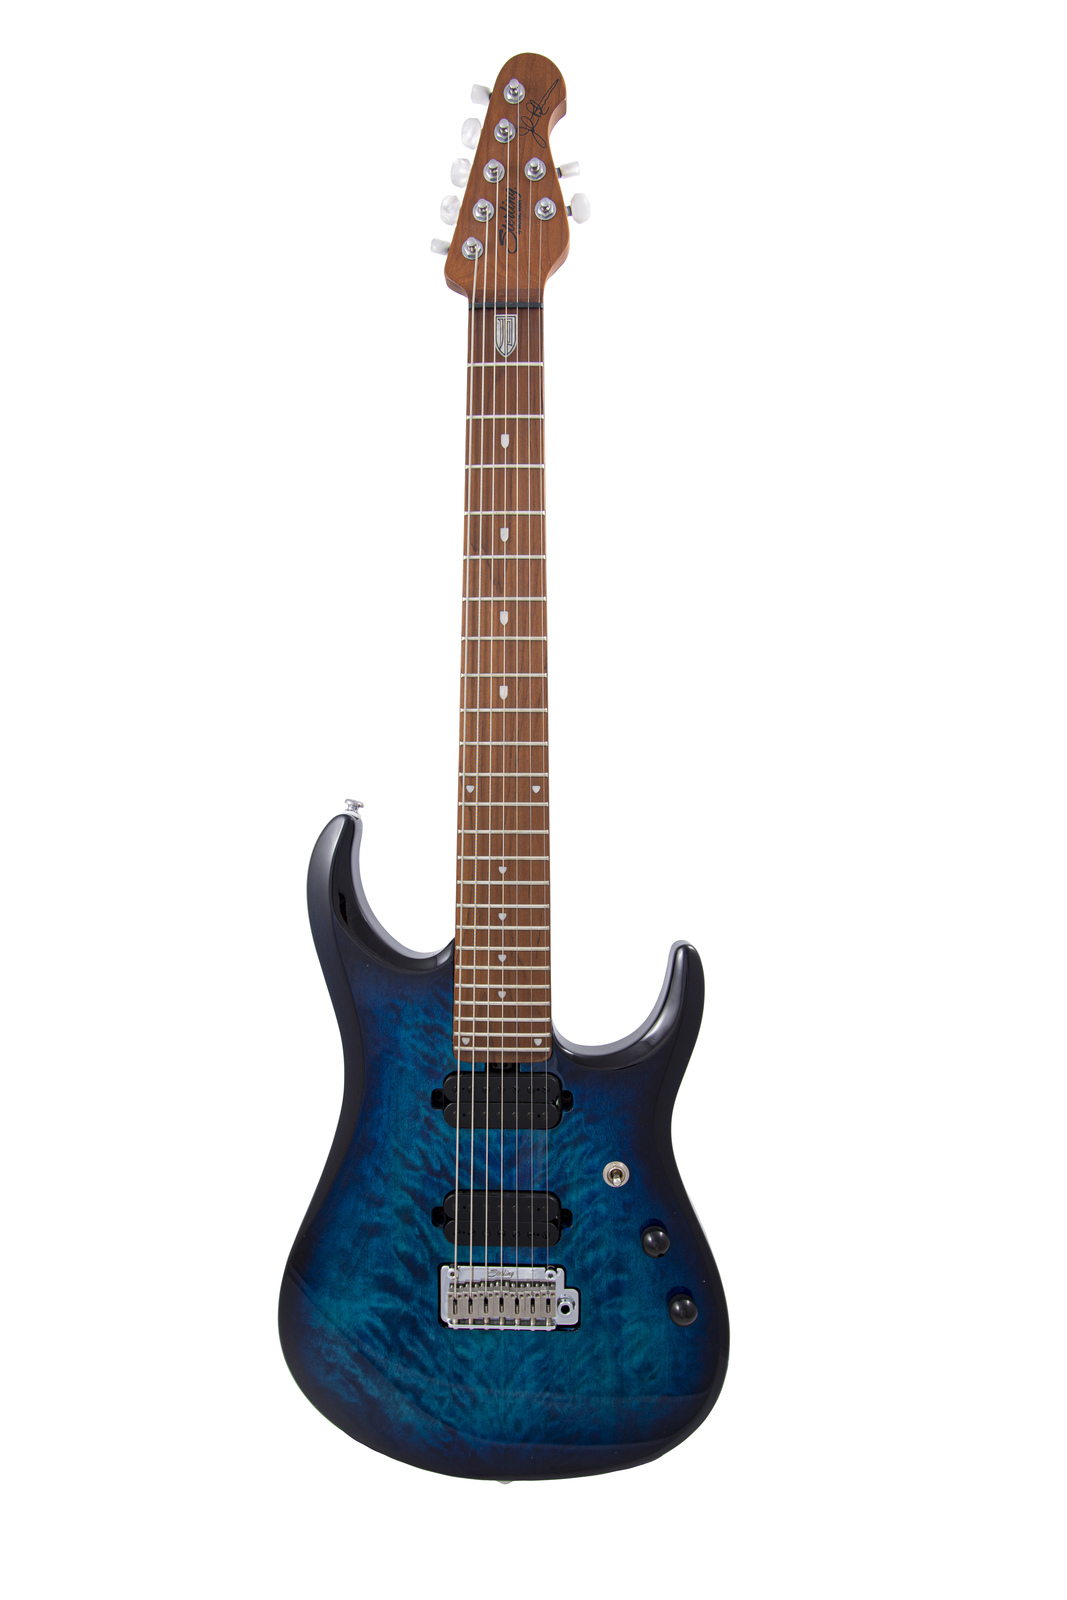 Sterling by Music Man Petrucci JP157 7 String Neptune Blue Signature Electric